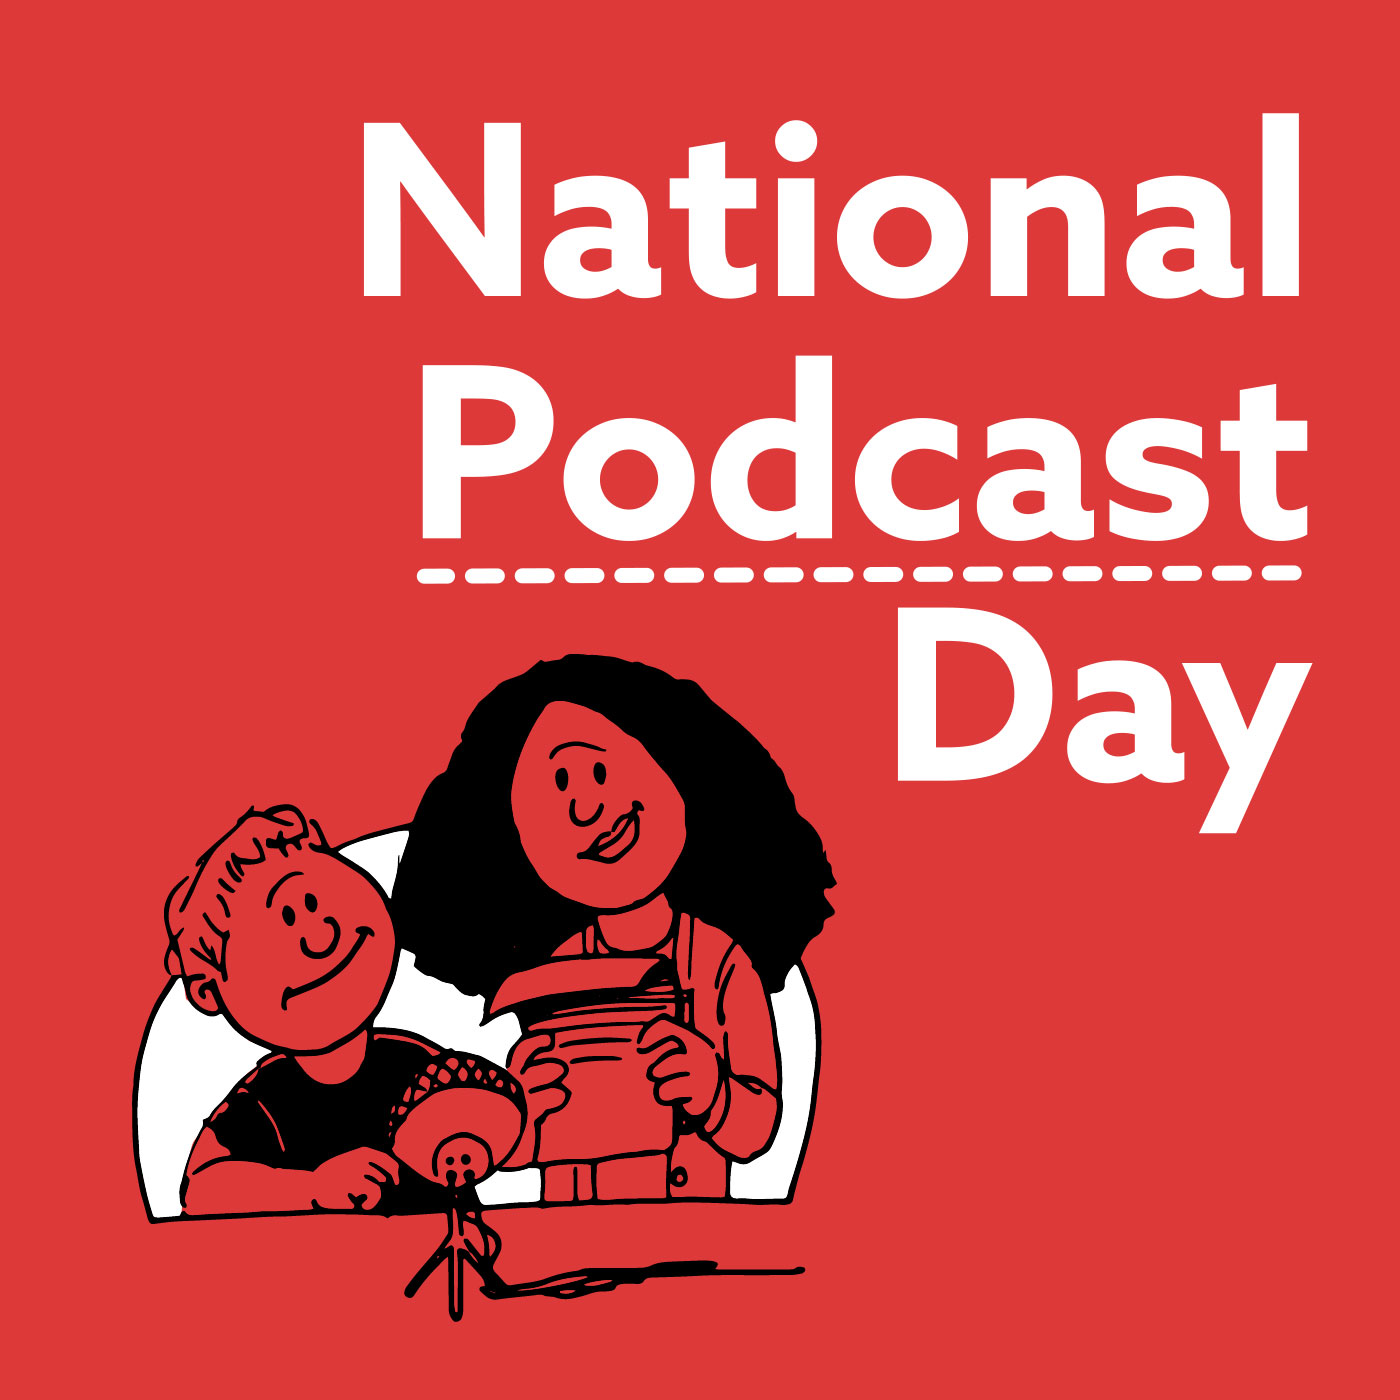 National Podcast Day